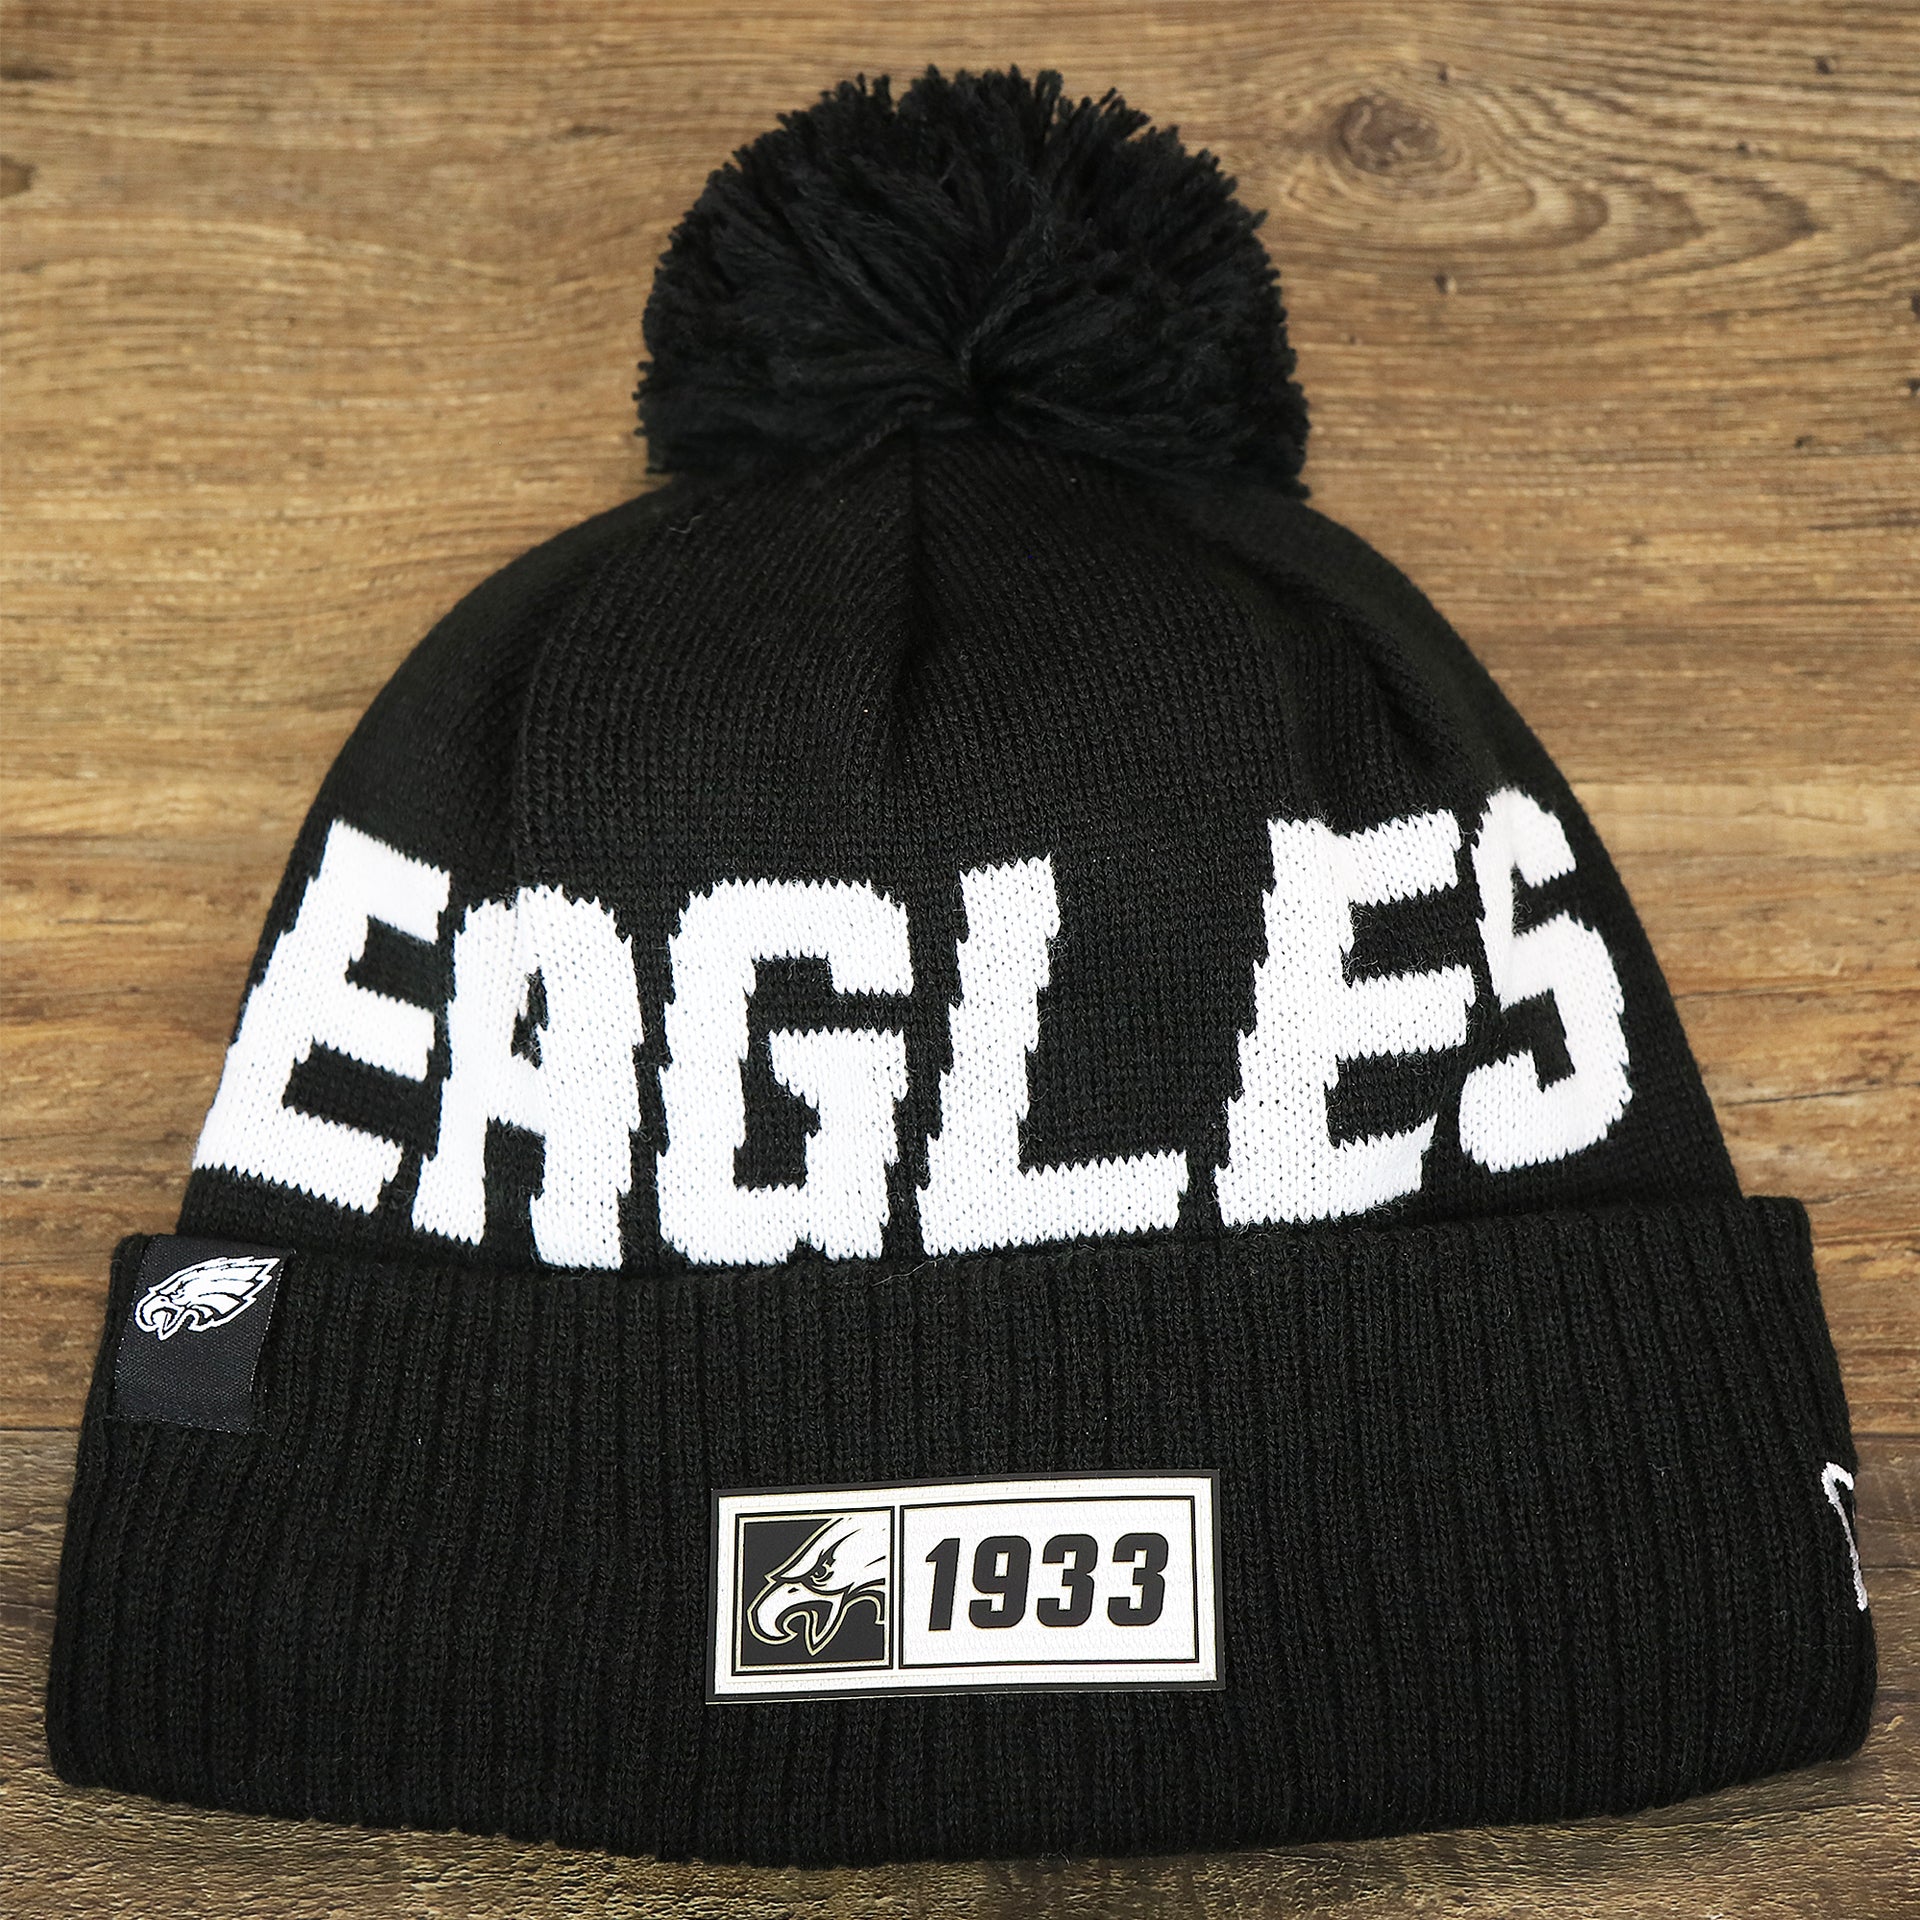 The front of the Philadelphia Eagles On Field Cuffed Winter Pom Pom Beanie | Black And White Winter Beanie